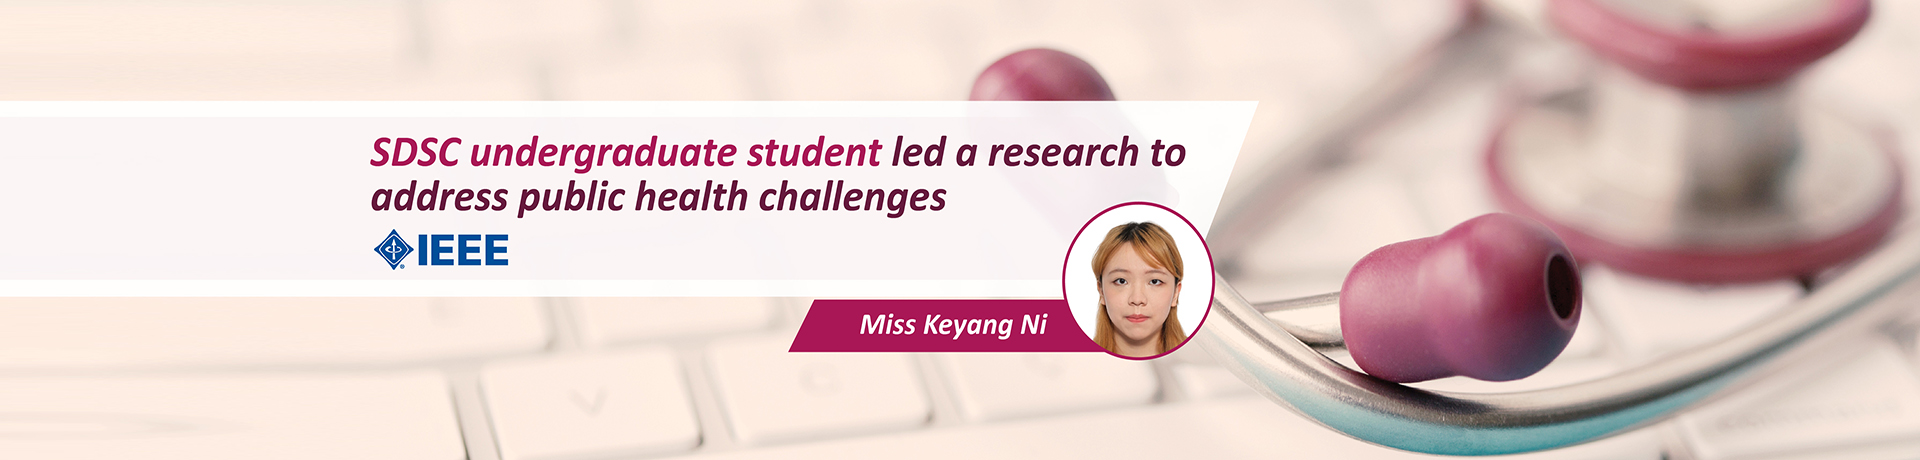 Student led a research eBanner_Final